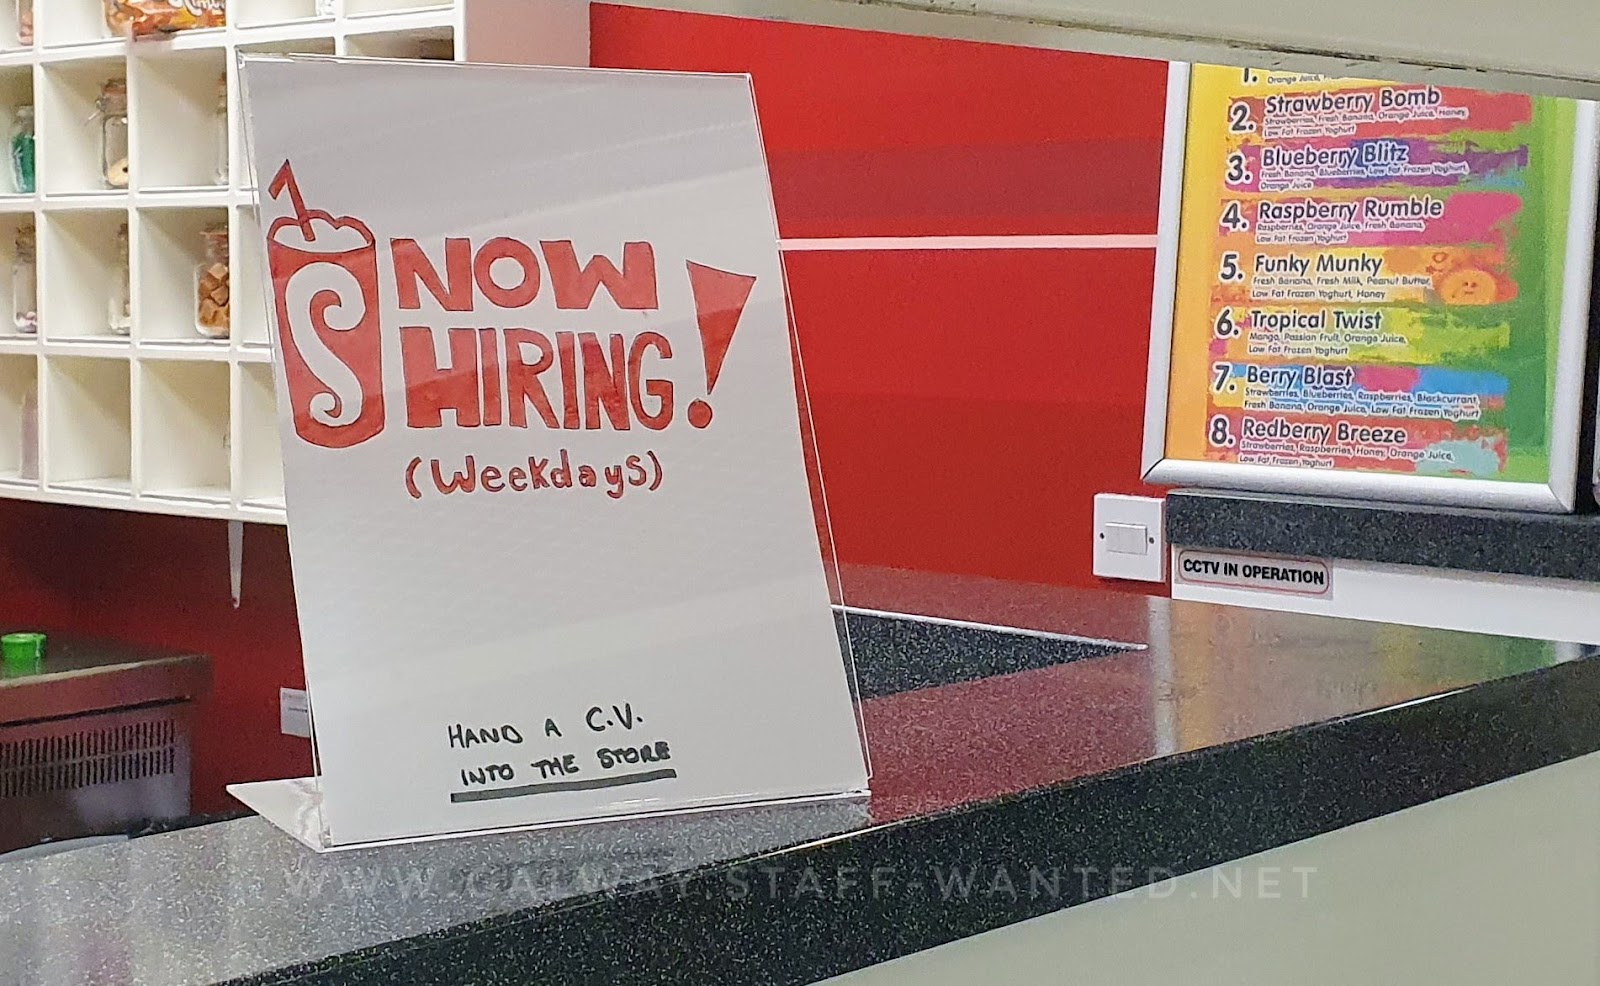 Shop counter with staff-wanted advert in a plastic display:  advertisement features a hand-drawn milkshake with a curly S and a straw.    Background includes a Shake Milkshakes menu, with drinks including Strawberry Bomb, Blueberry Blitz, Raspberry Rumble, Funky Munkey, Tropical Twist, Berry Blast and Redberry Breeze.  Sign shows ingredient list of each of these.